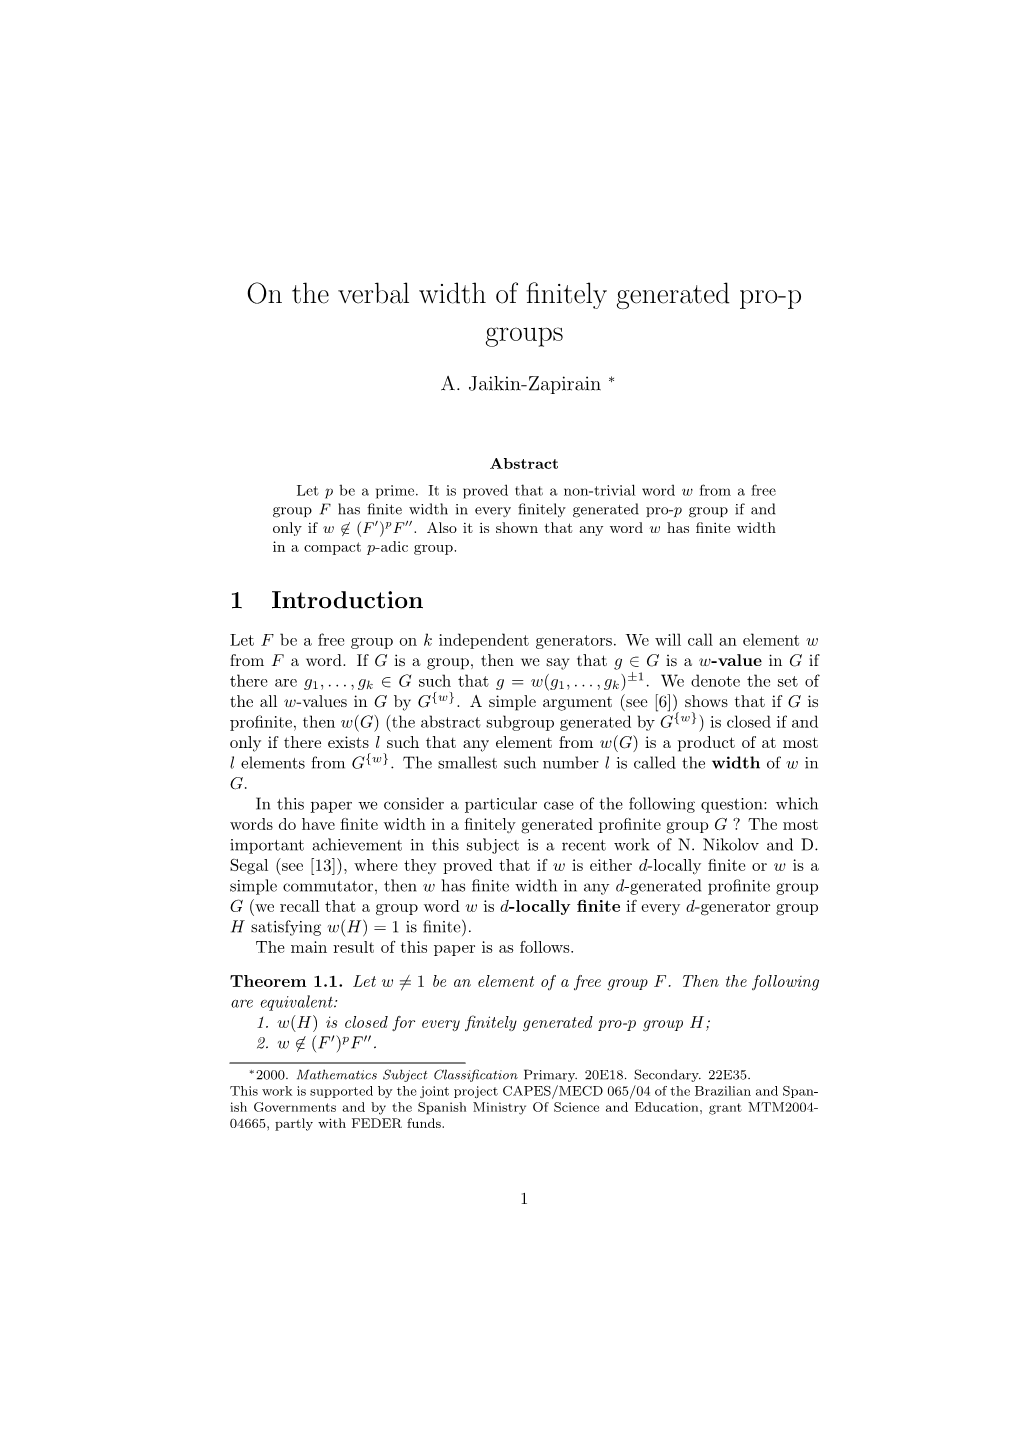 On the Verbal Width of Finitely Generated Pro-P Groups